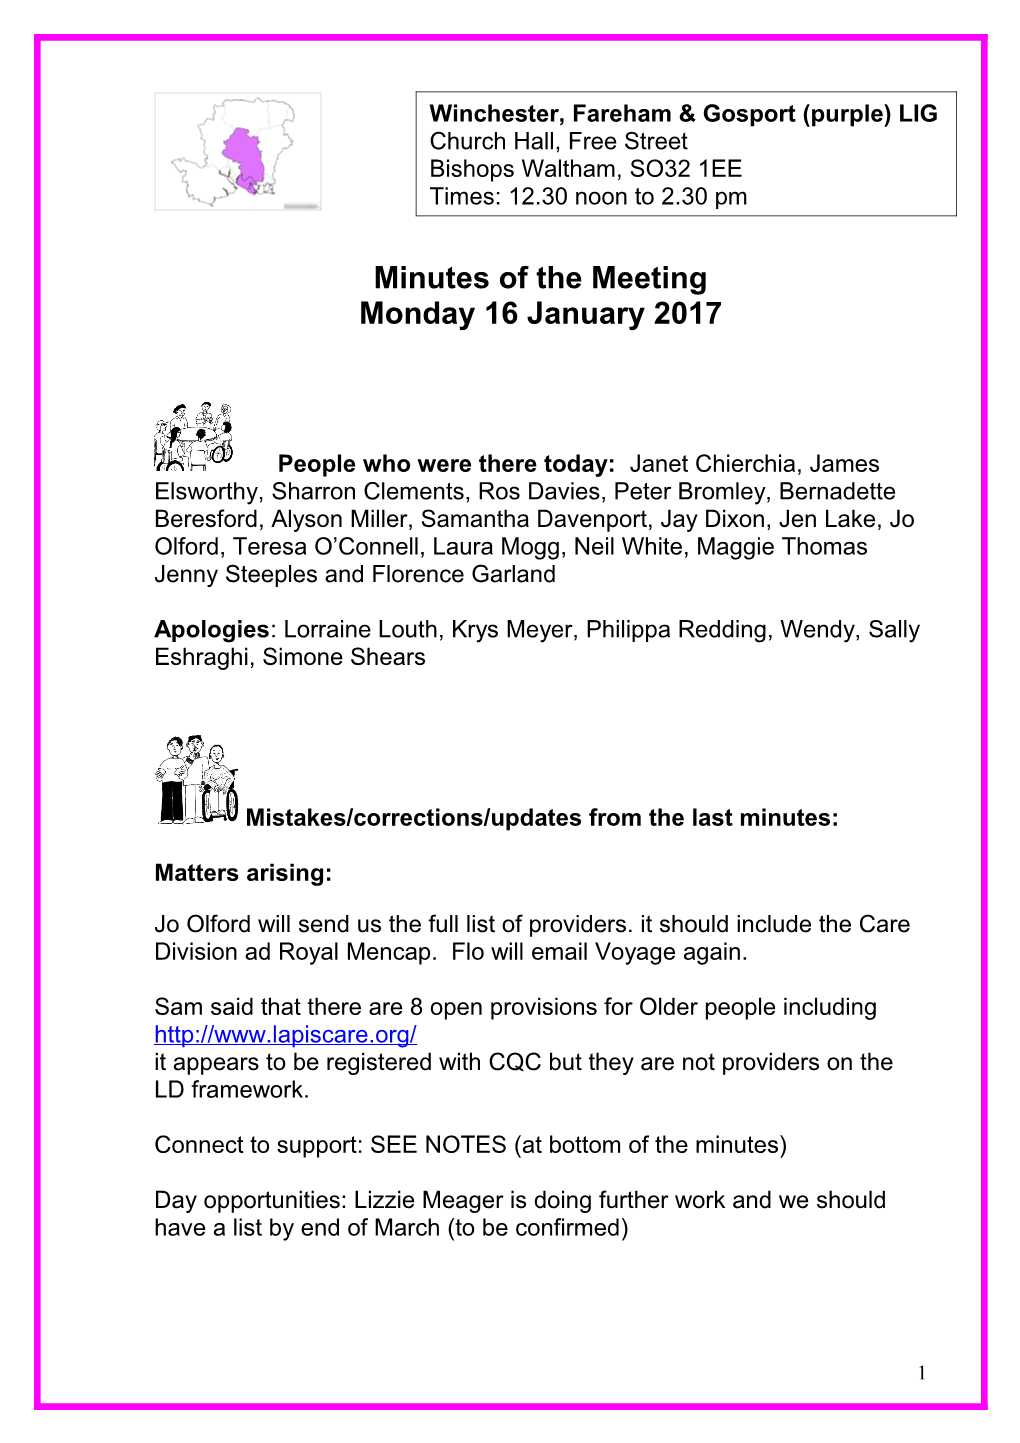 Minutes of the Meeting s1